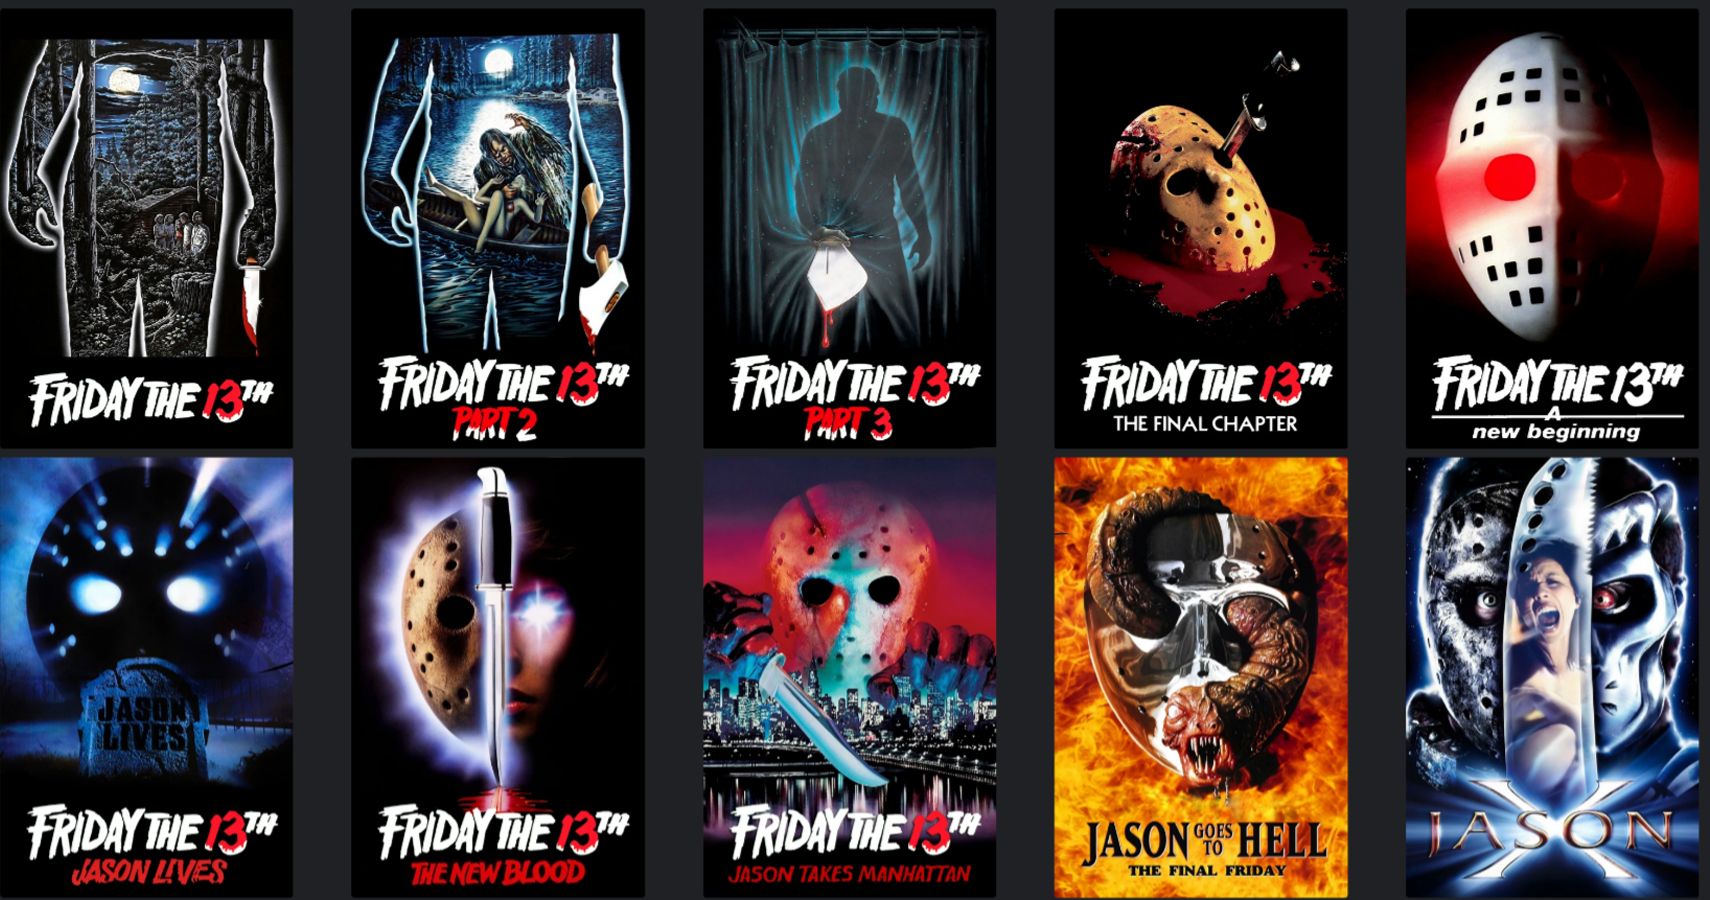 Every Friday The 13th Movie Where You Can Watch Them Online